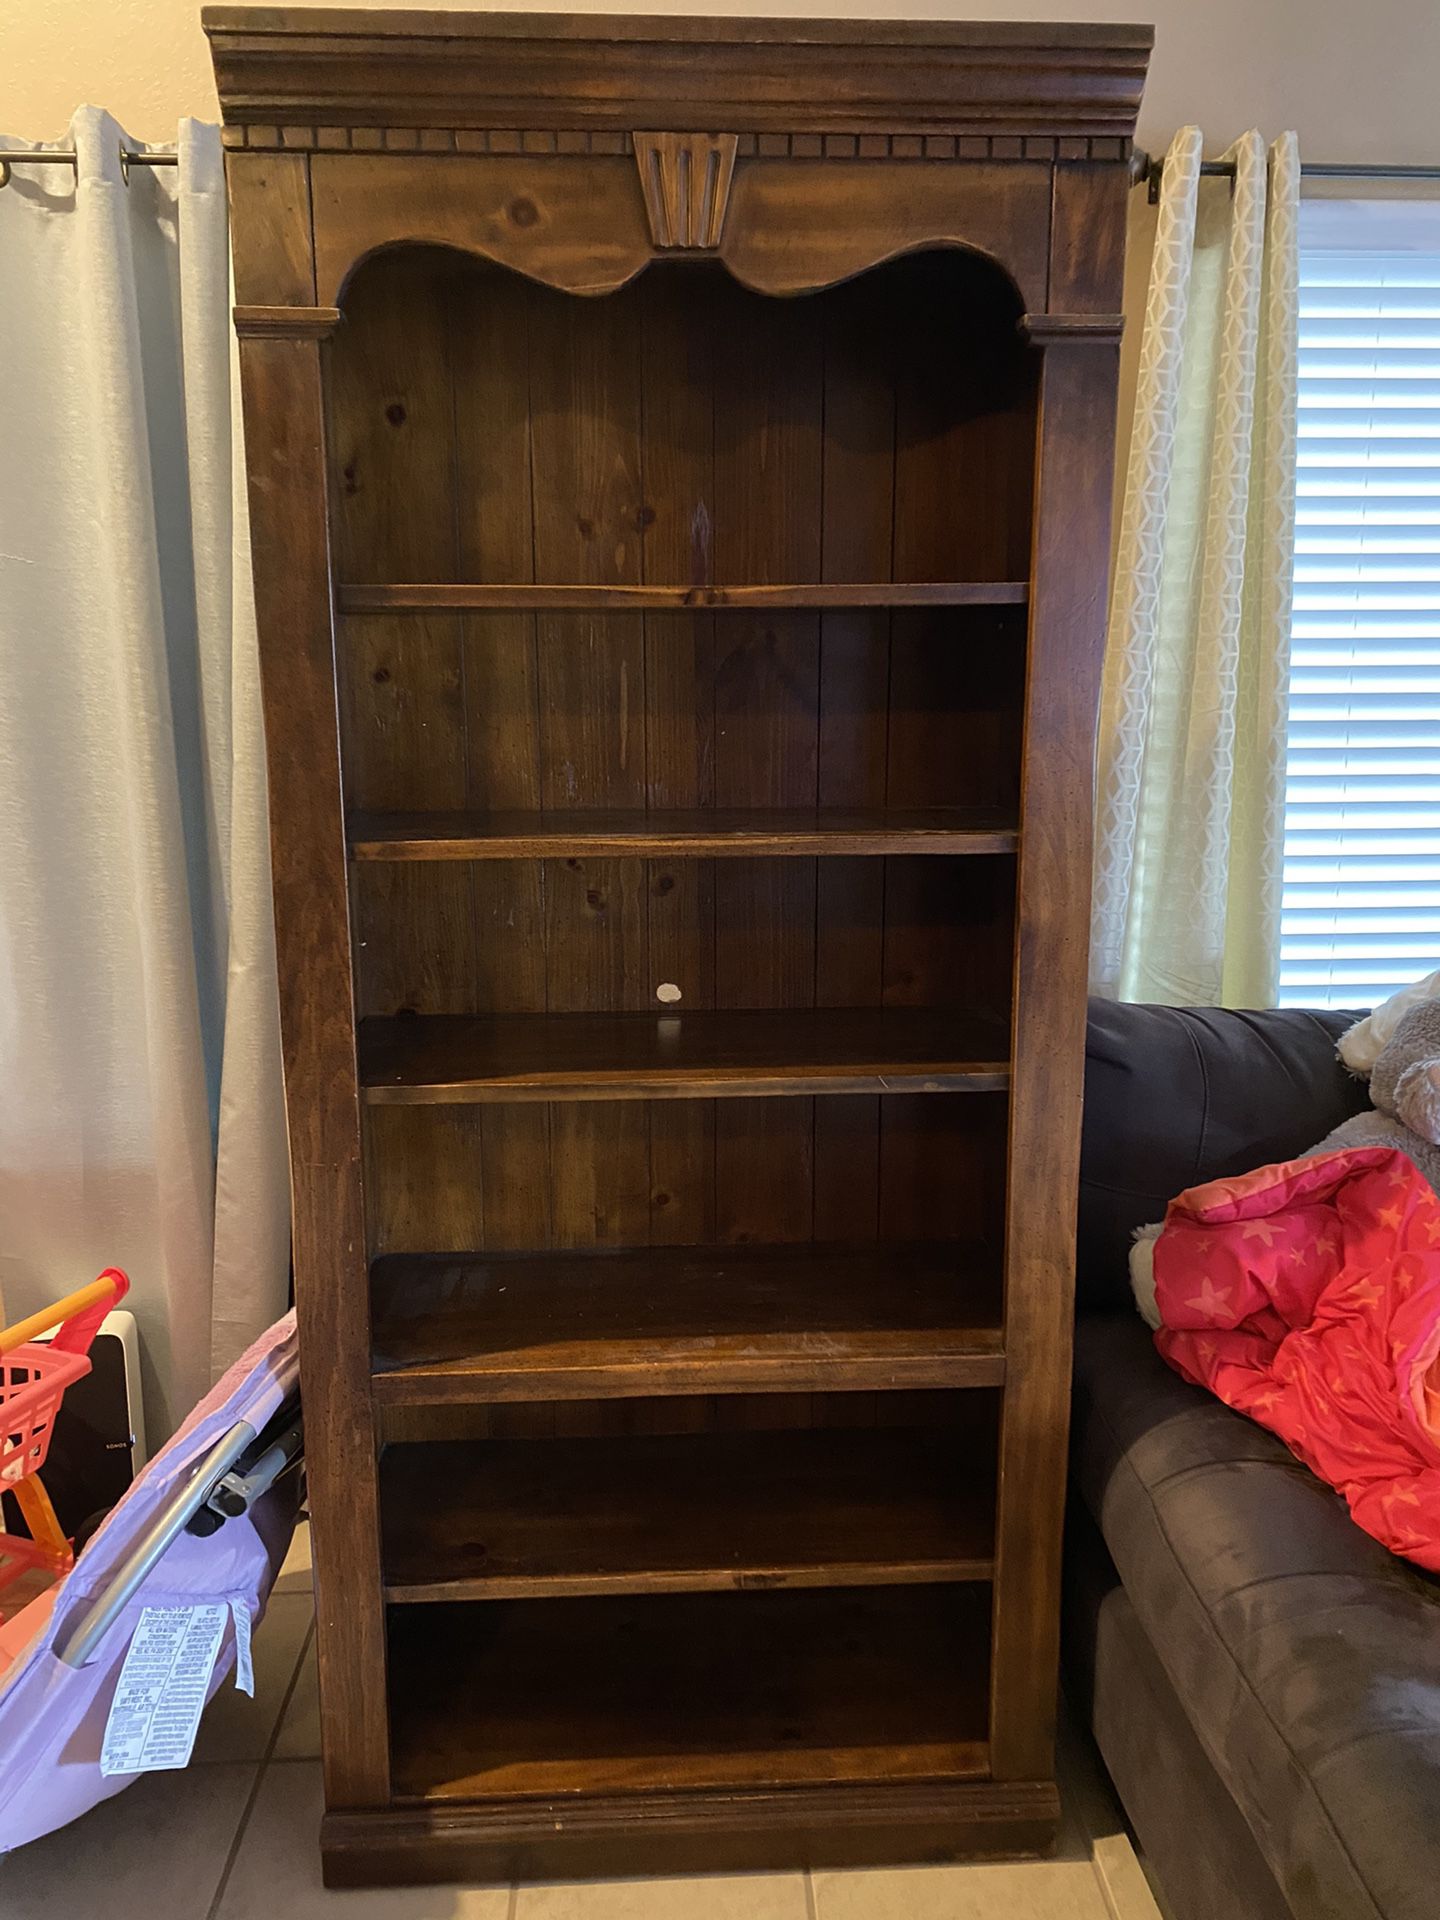 2 Solid wood Bookshelves FOR SALE $200 EACH